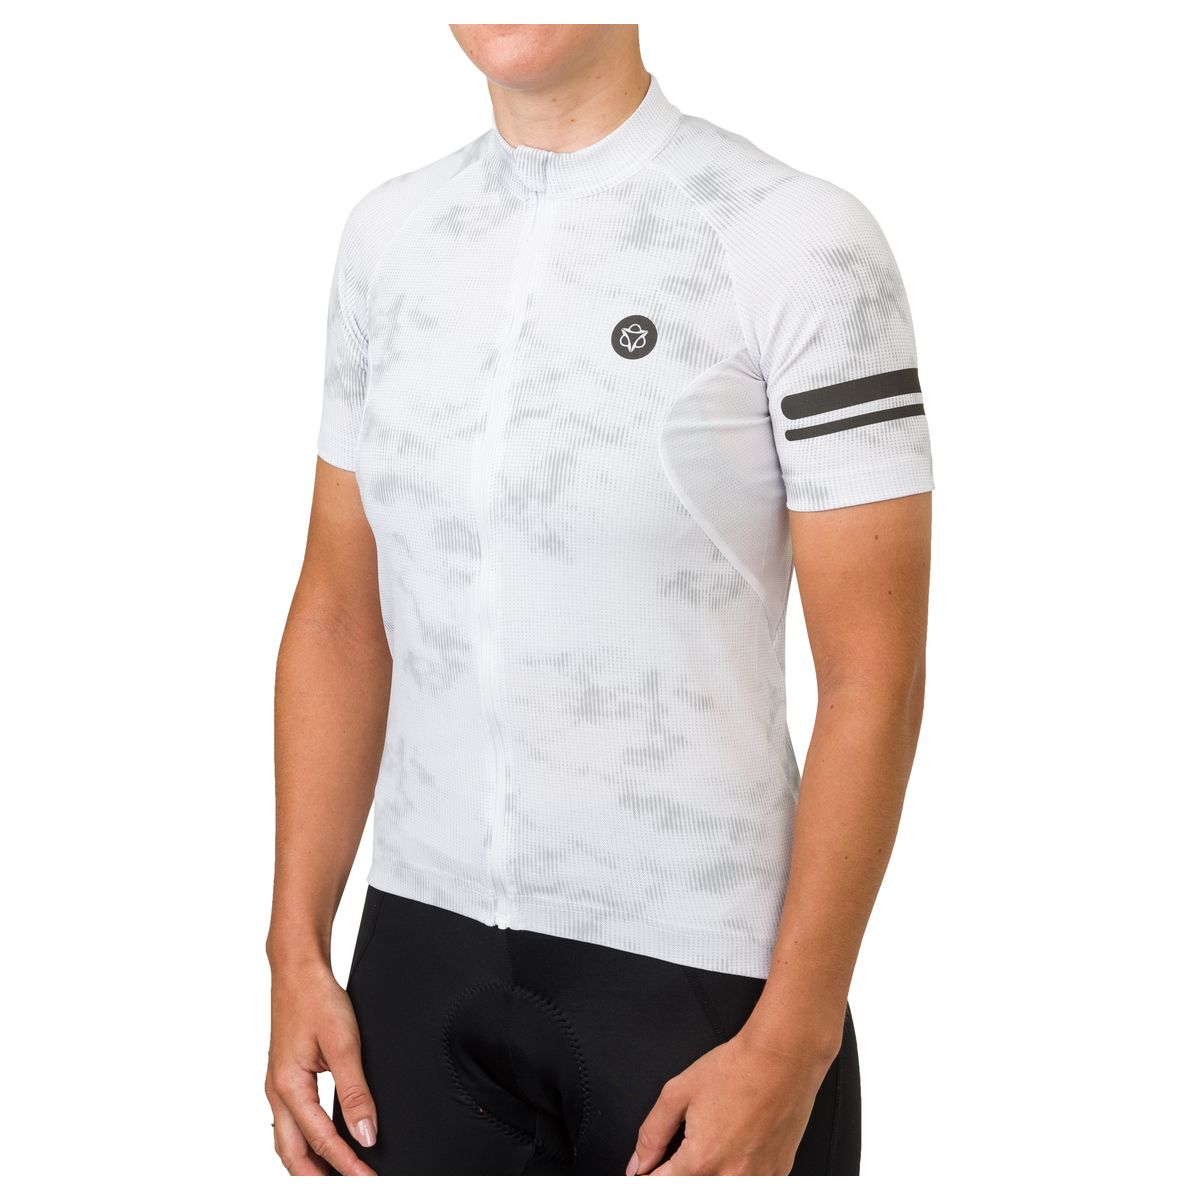 Reflective Jersey SS Essential Women fit example